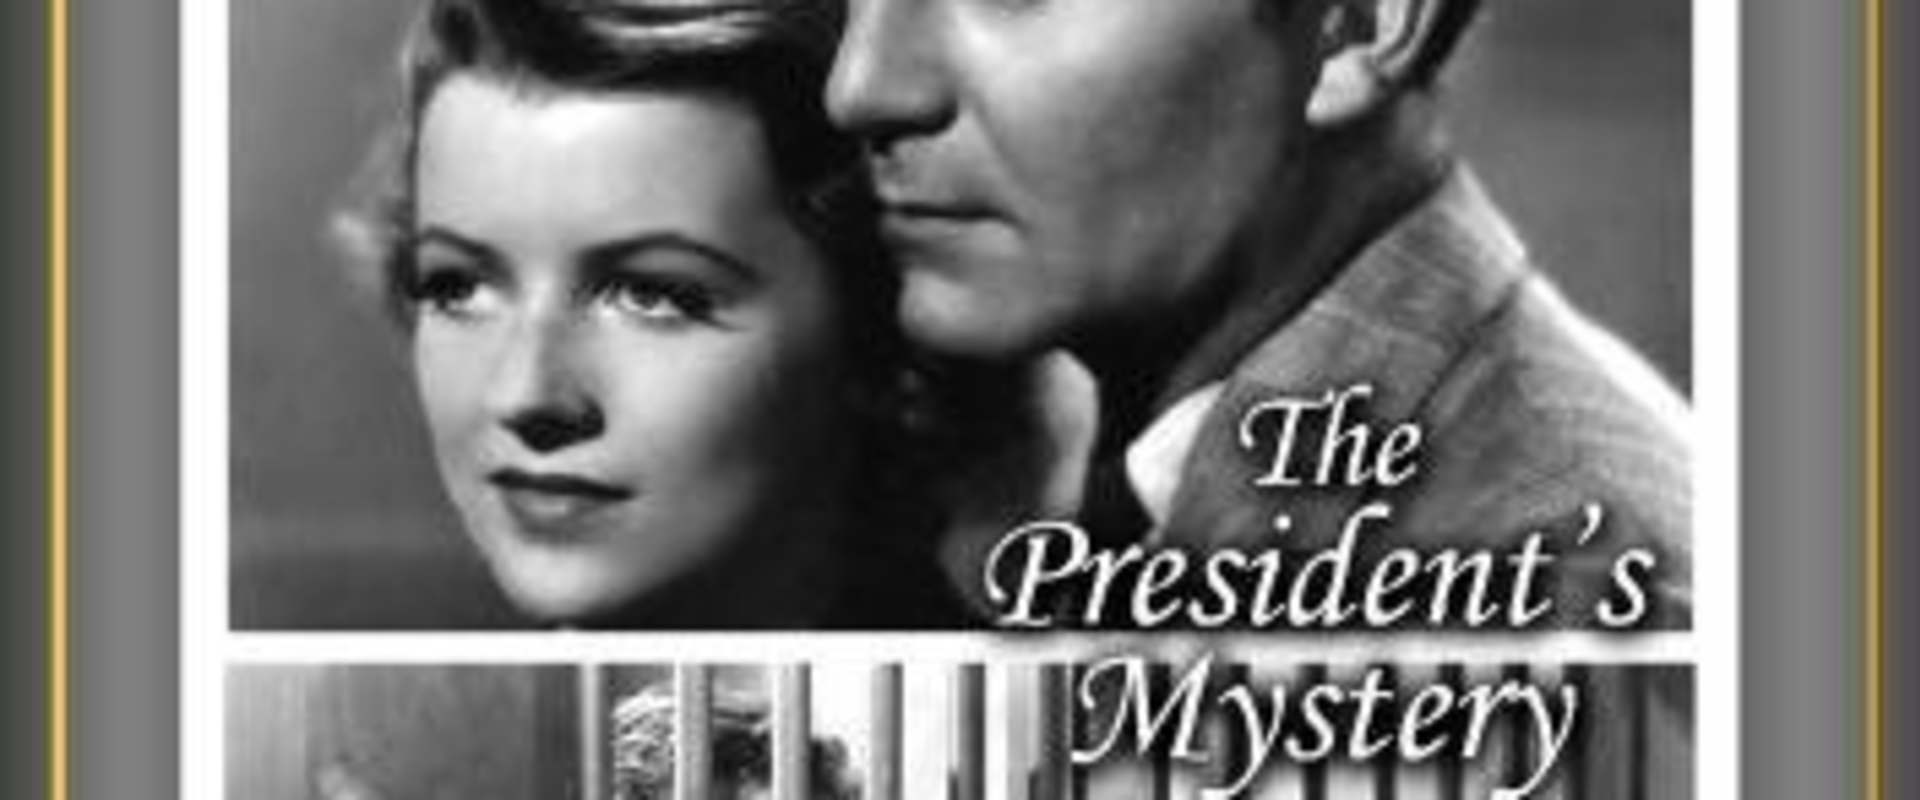 The President's Mystery background 1